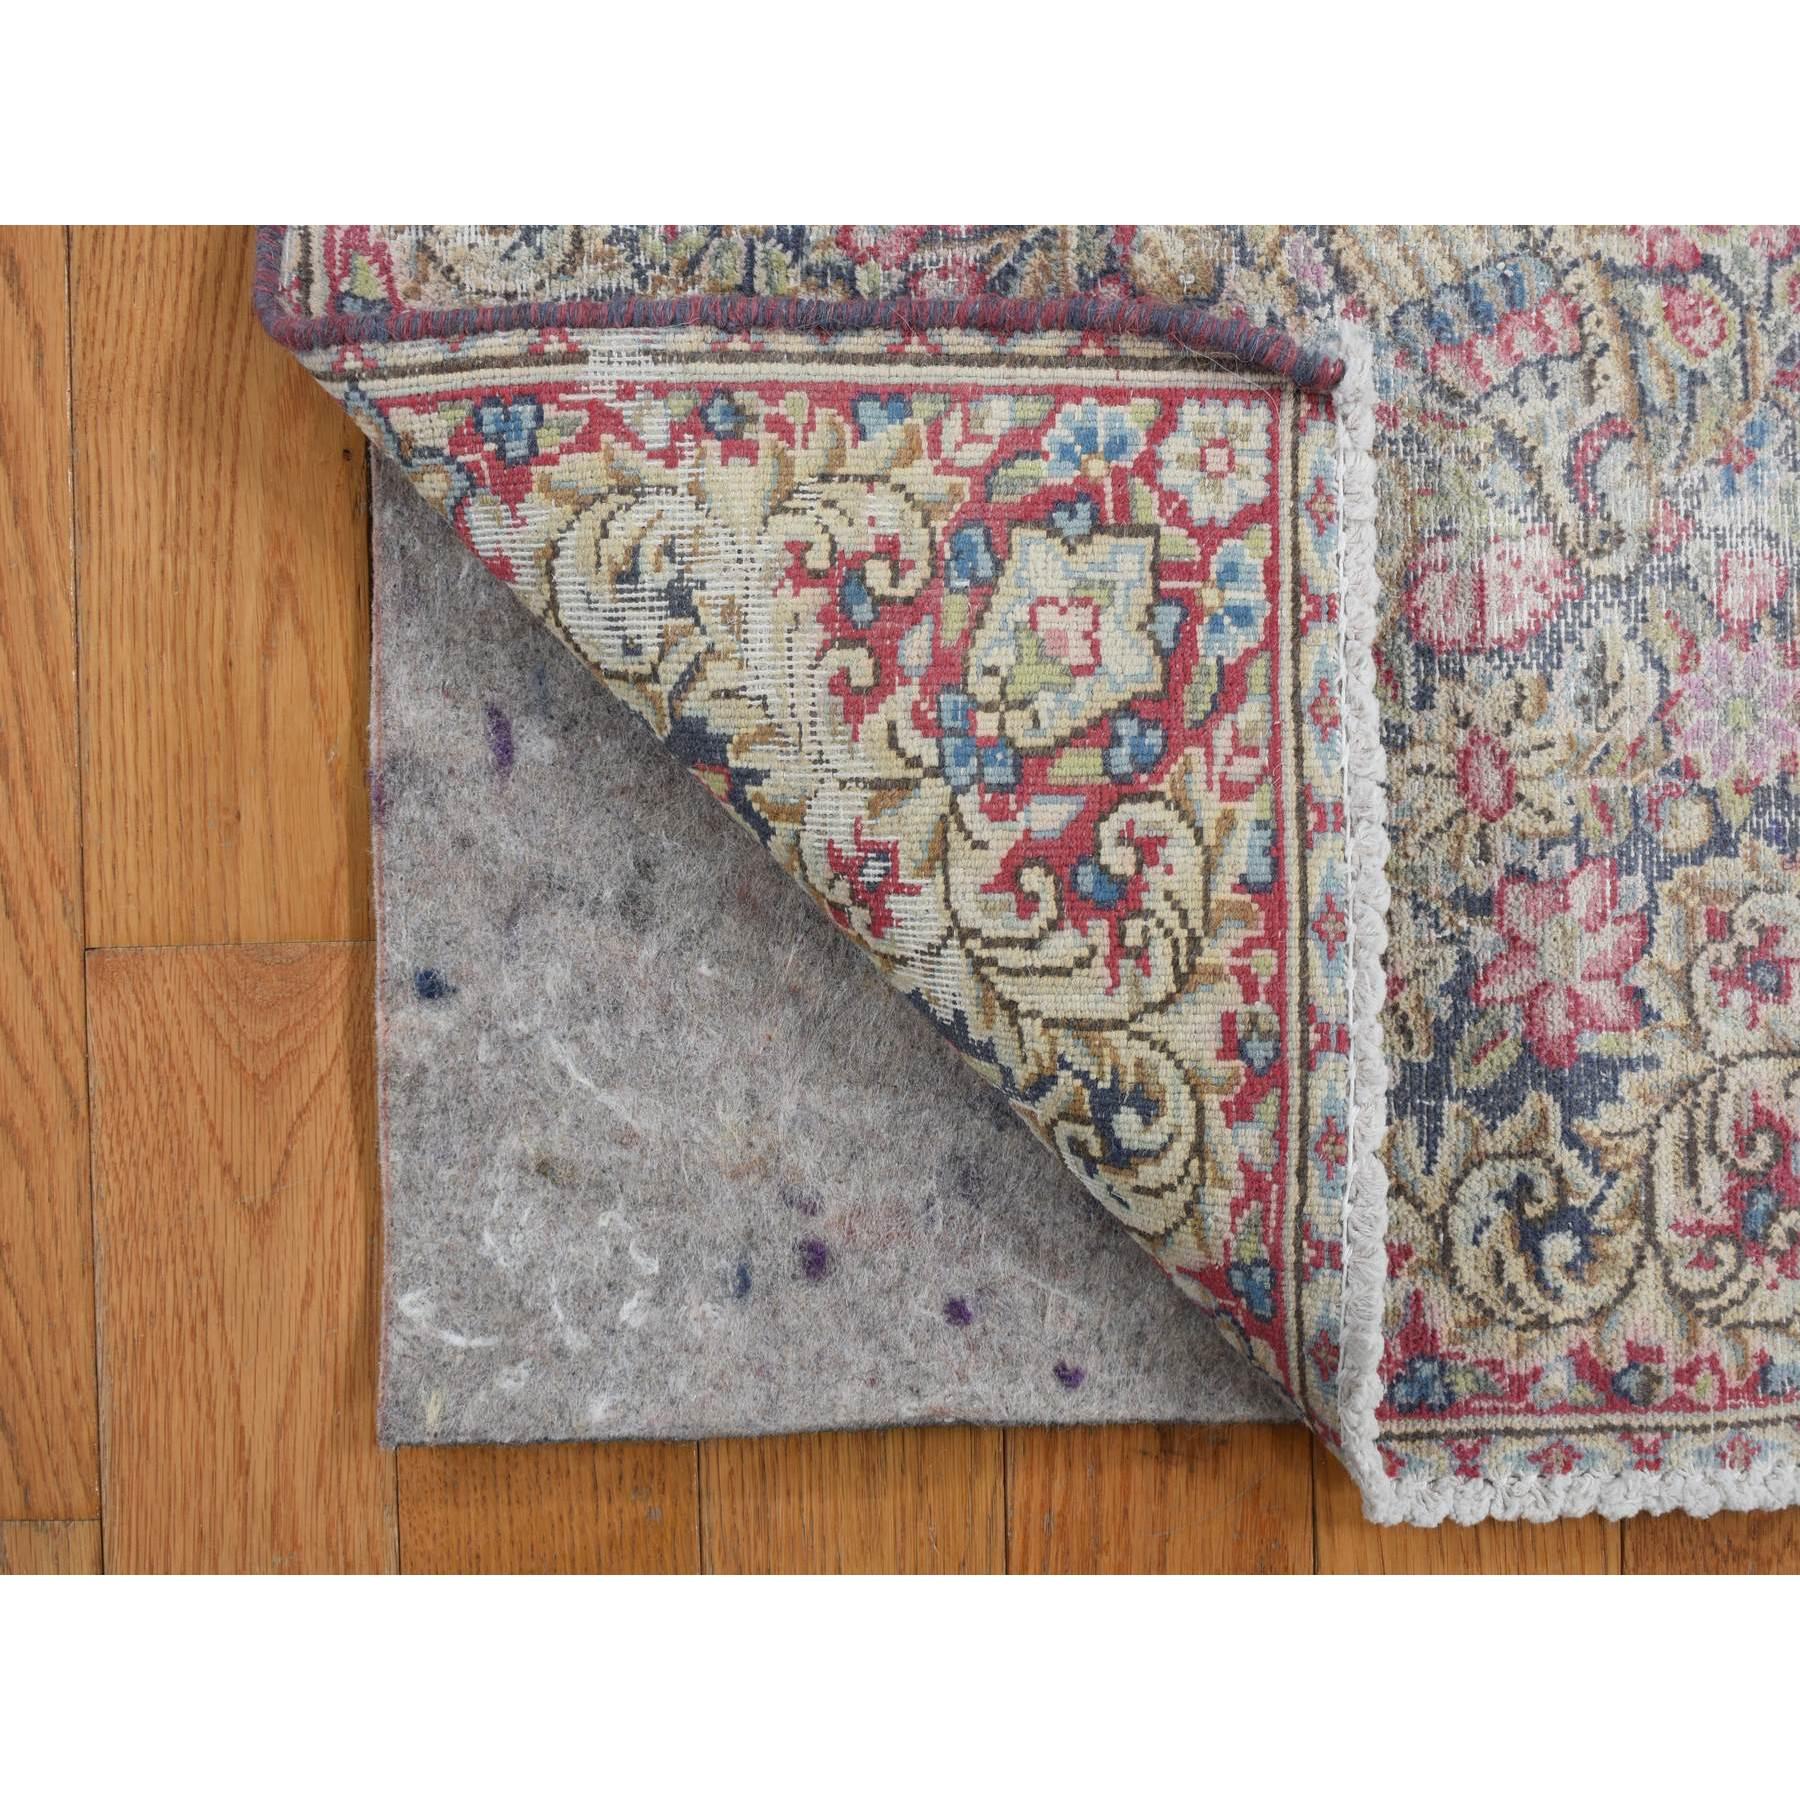 Medieval Blue Pure Wool Vintage and Worn Persian Kerman Hand Knotted Mat Rug 1'6